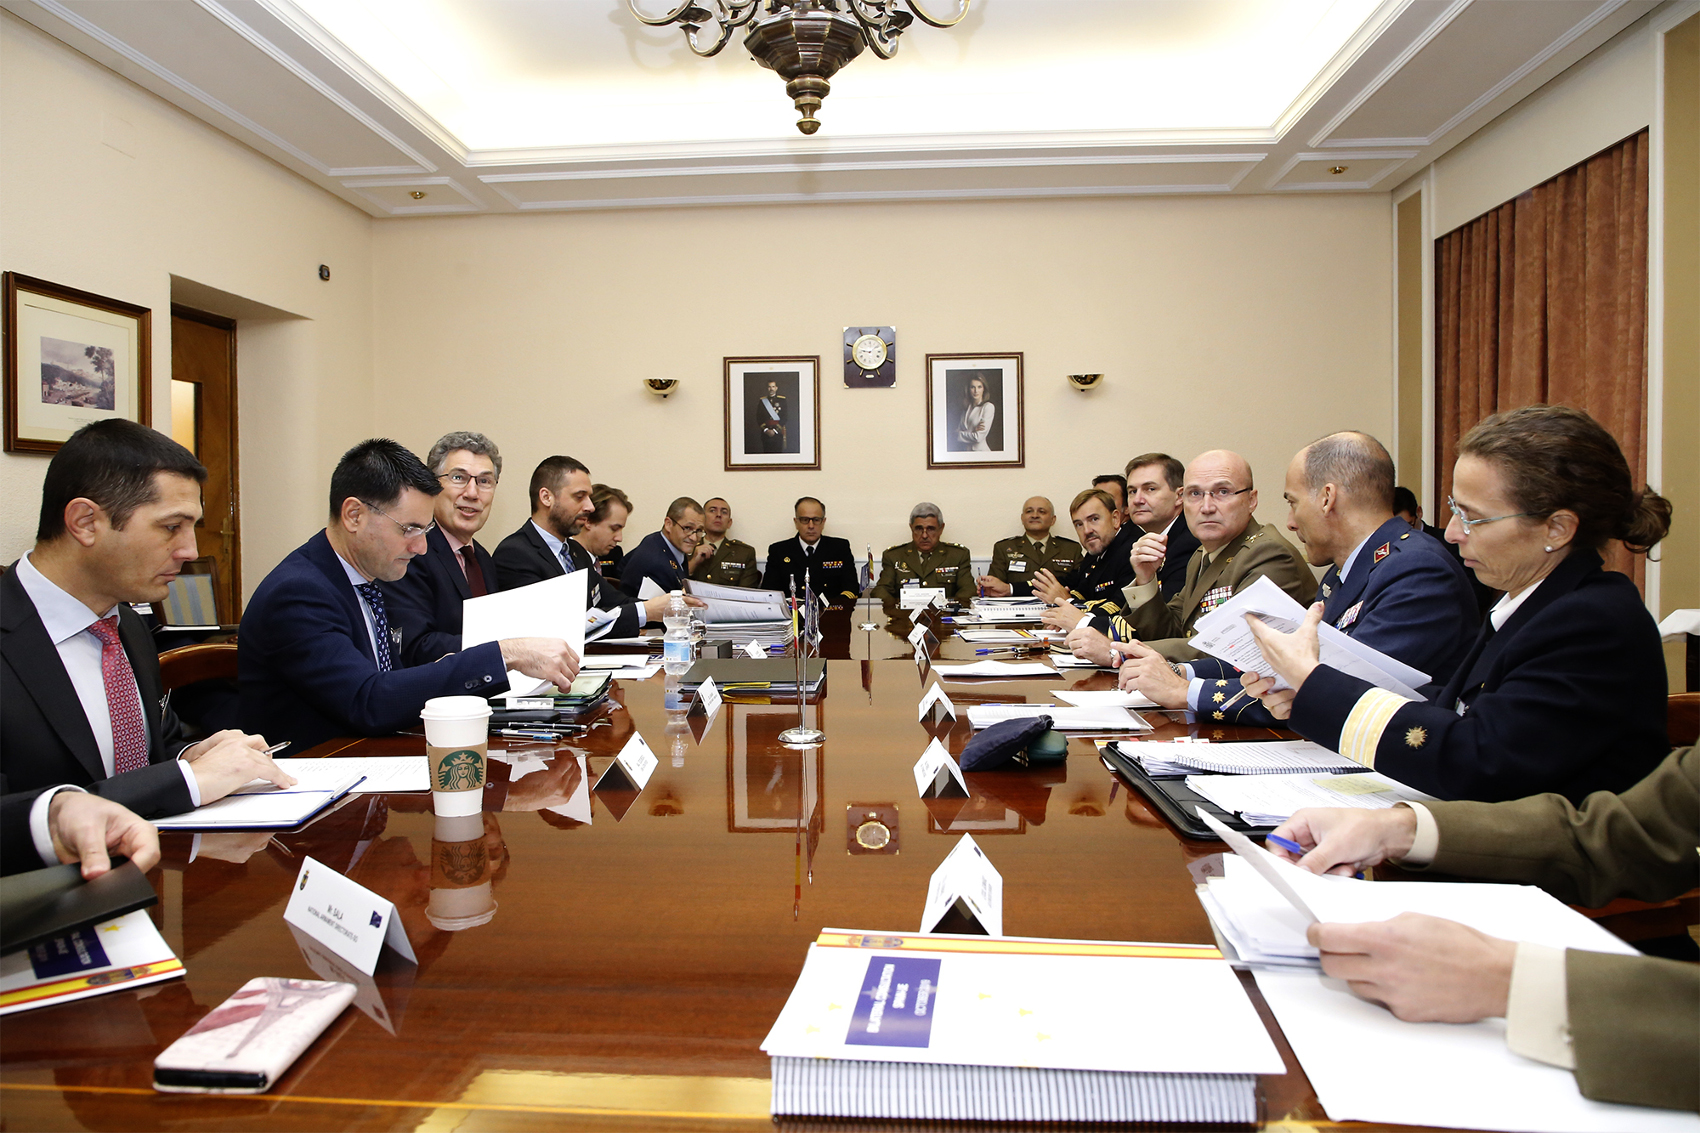 Joint Chiefs of Staff organise a bilateral meeting with European Union representatives